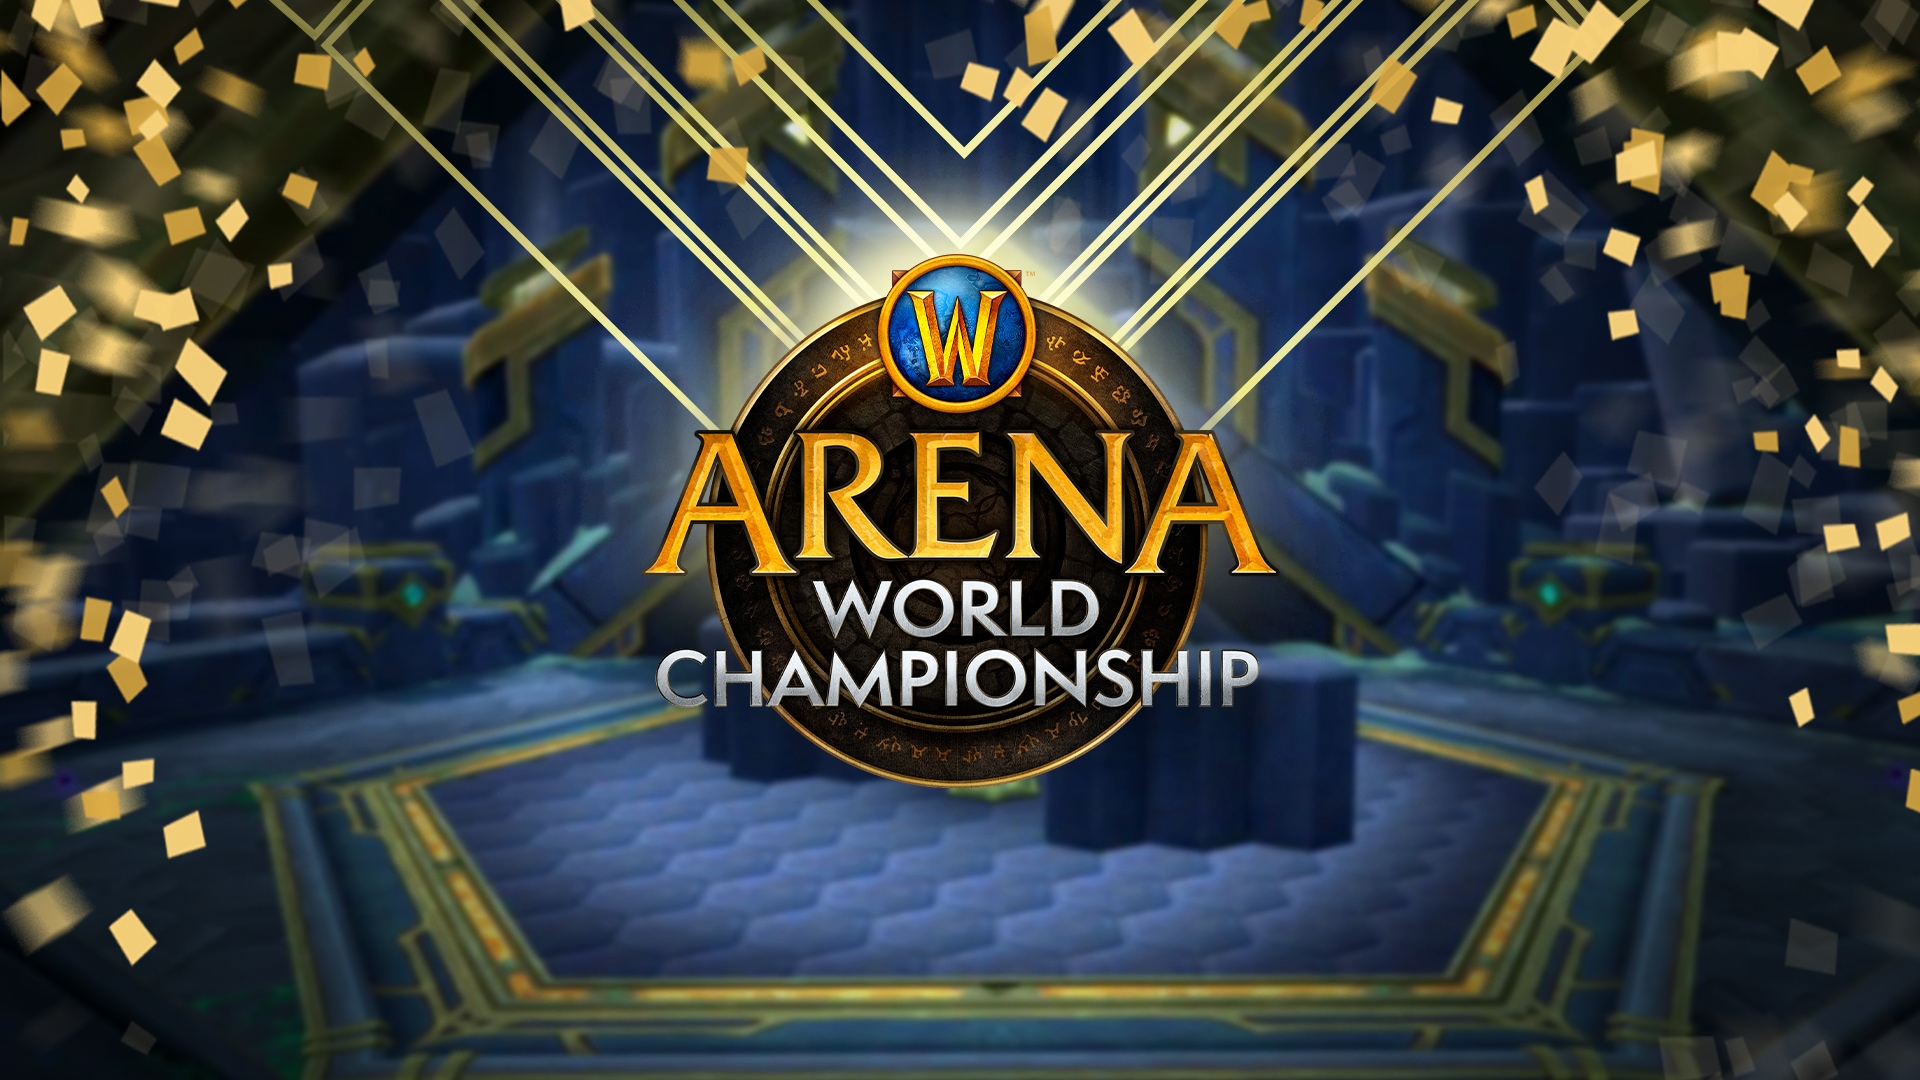 Arena World Championship Circuit Viewer’s Guide